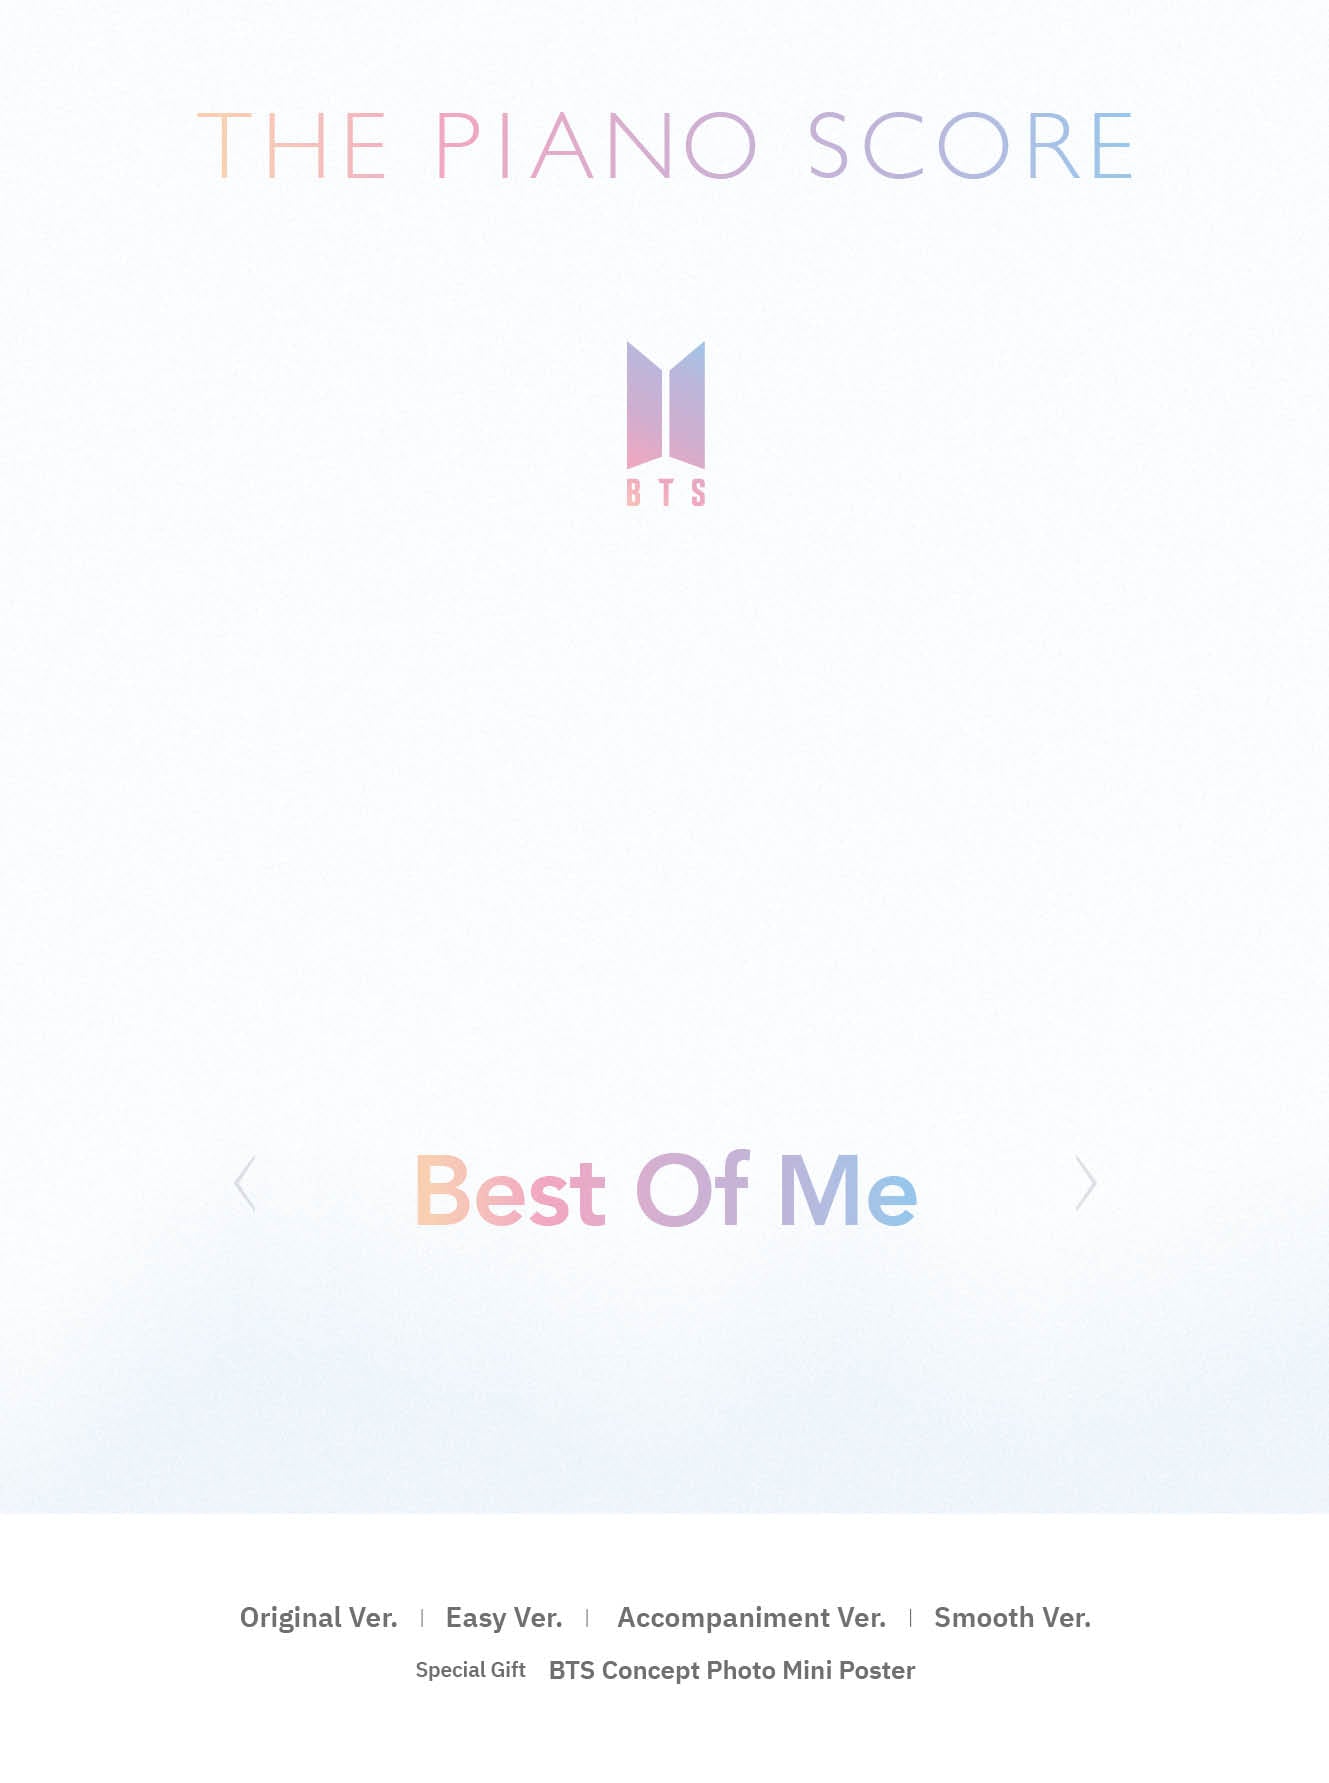 BTS - THE PIANO SCORE : BEST OF ME - COKODIVE